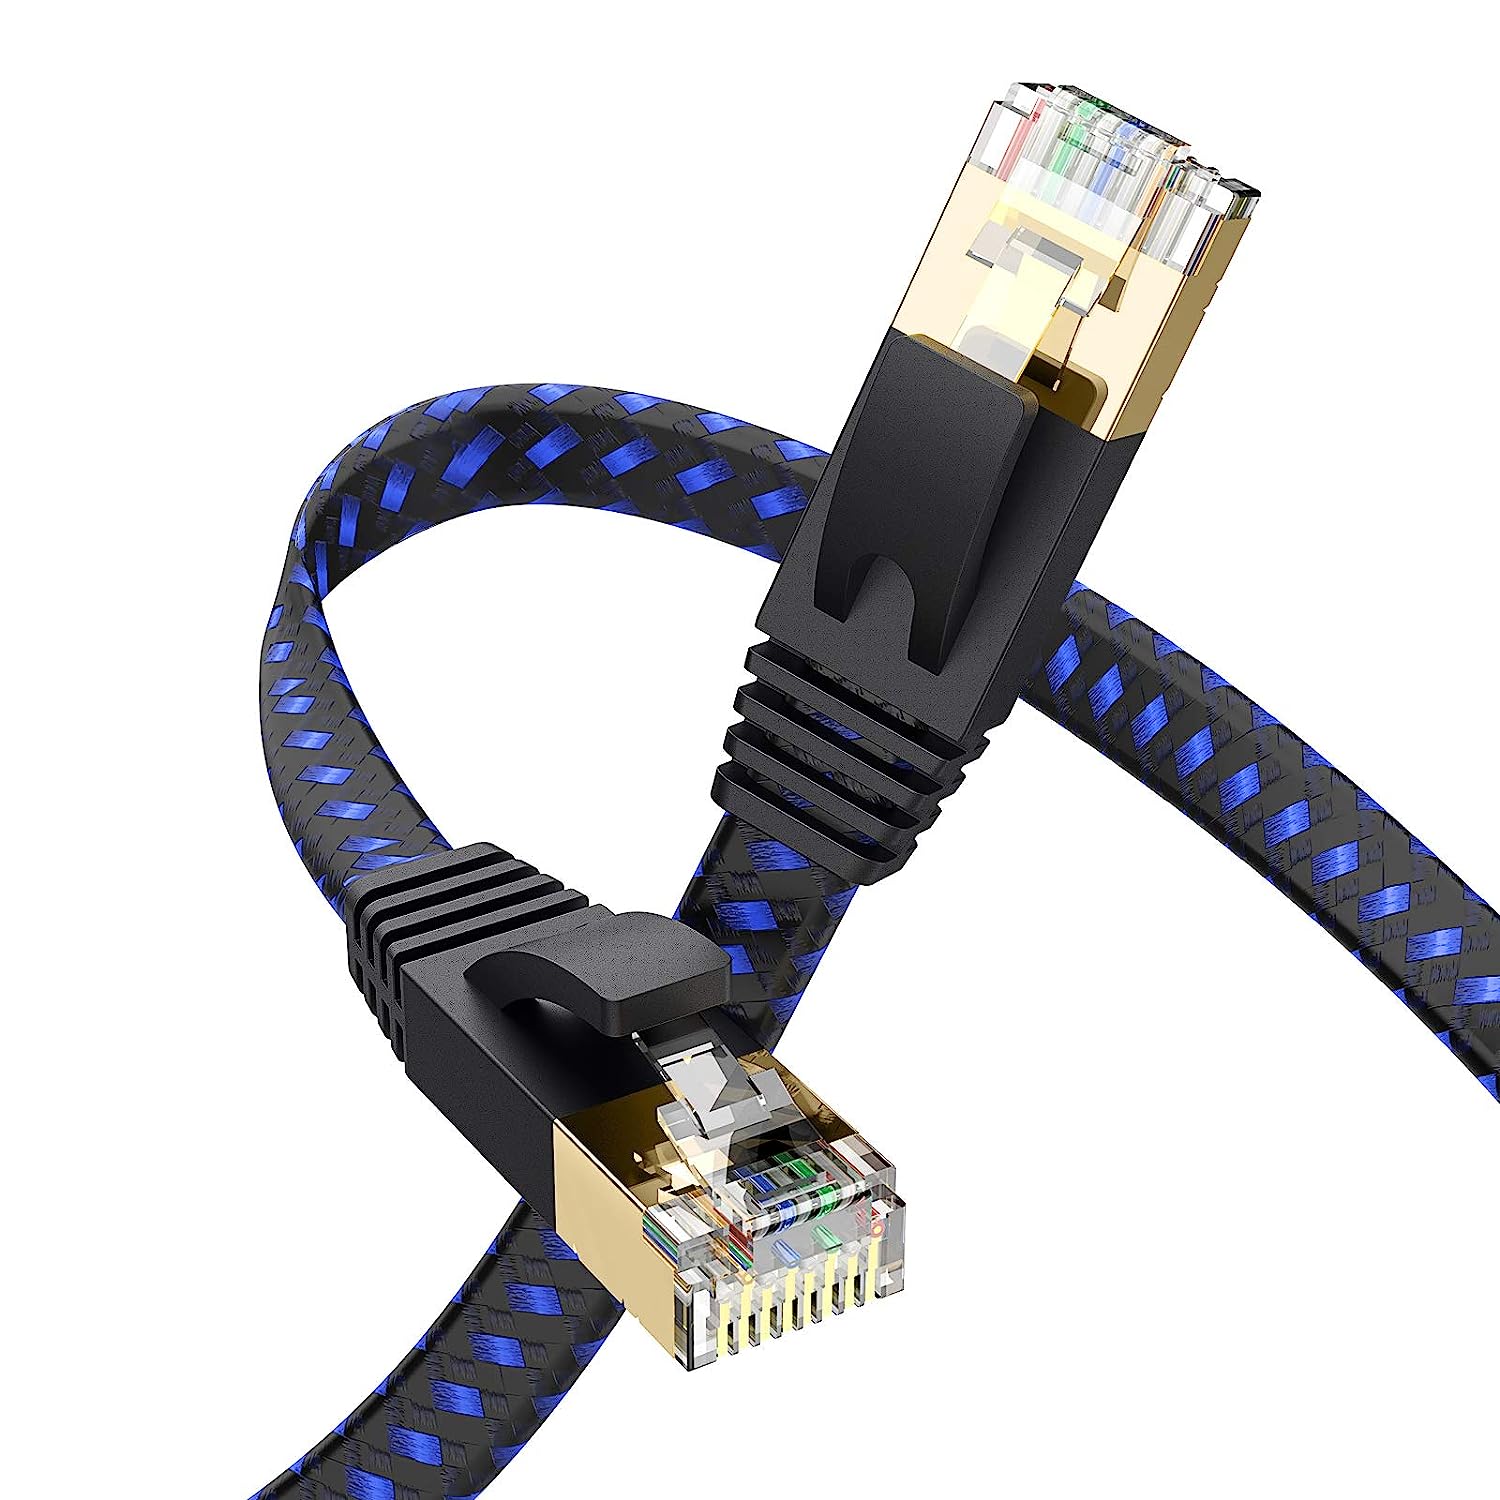 Ethernet Cable 20 ft, FXAVA Cat 7 Flat Ethernet Cable [...]